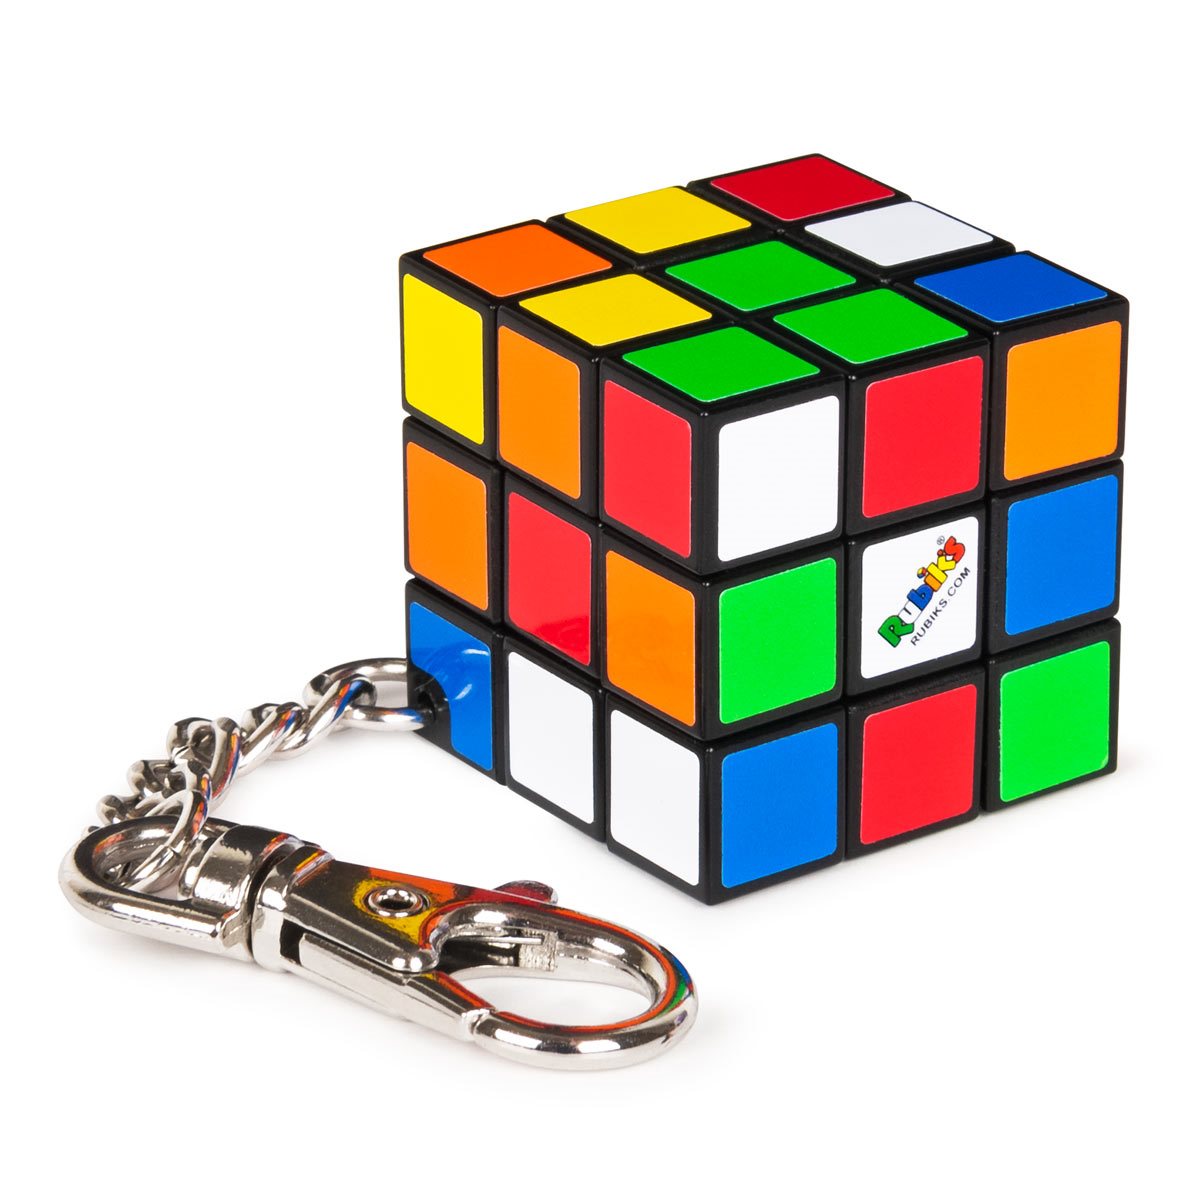 Solving the classic Rubik's Cube implies arranging its tiles such that